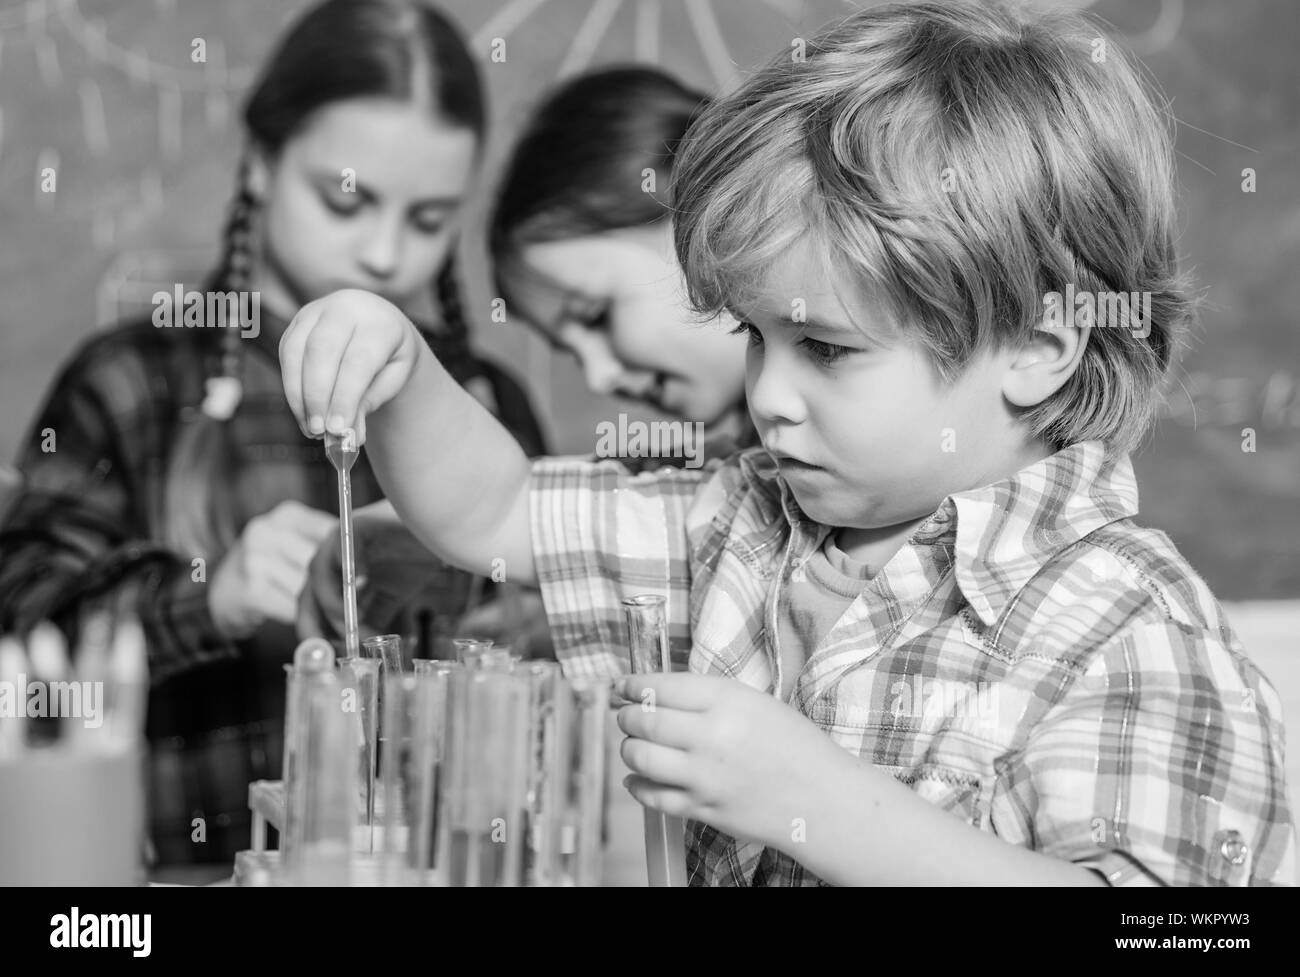 Laboratory Research - Scientific project For Chemical test. Science and education. chemistry lab. happy children. back to school. School chemistry laboratory. Working together to prepare for finals. Stock Photo